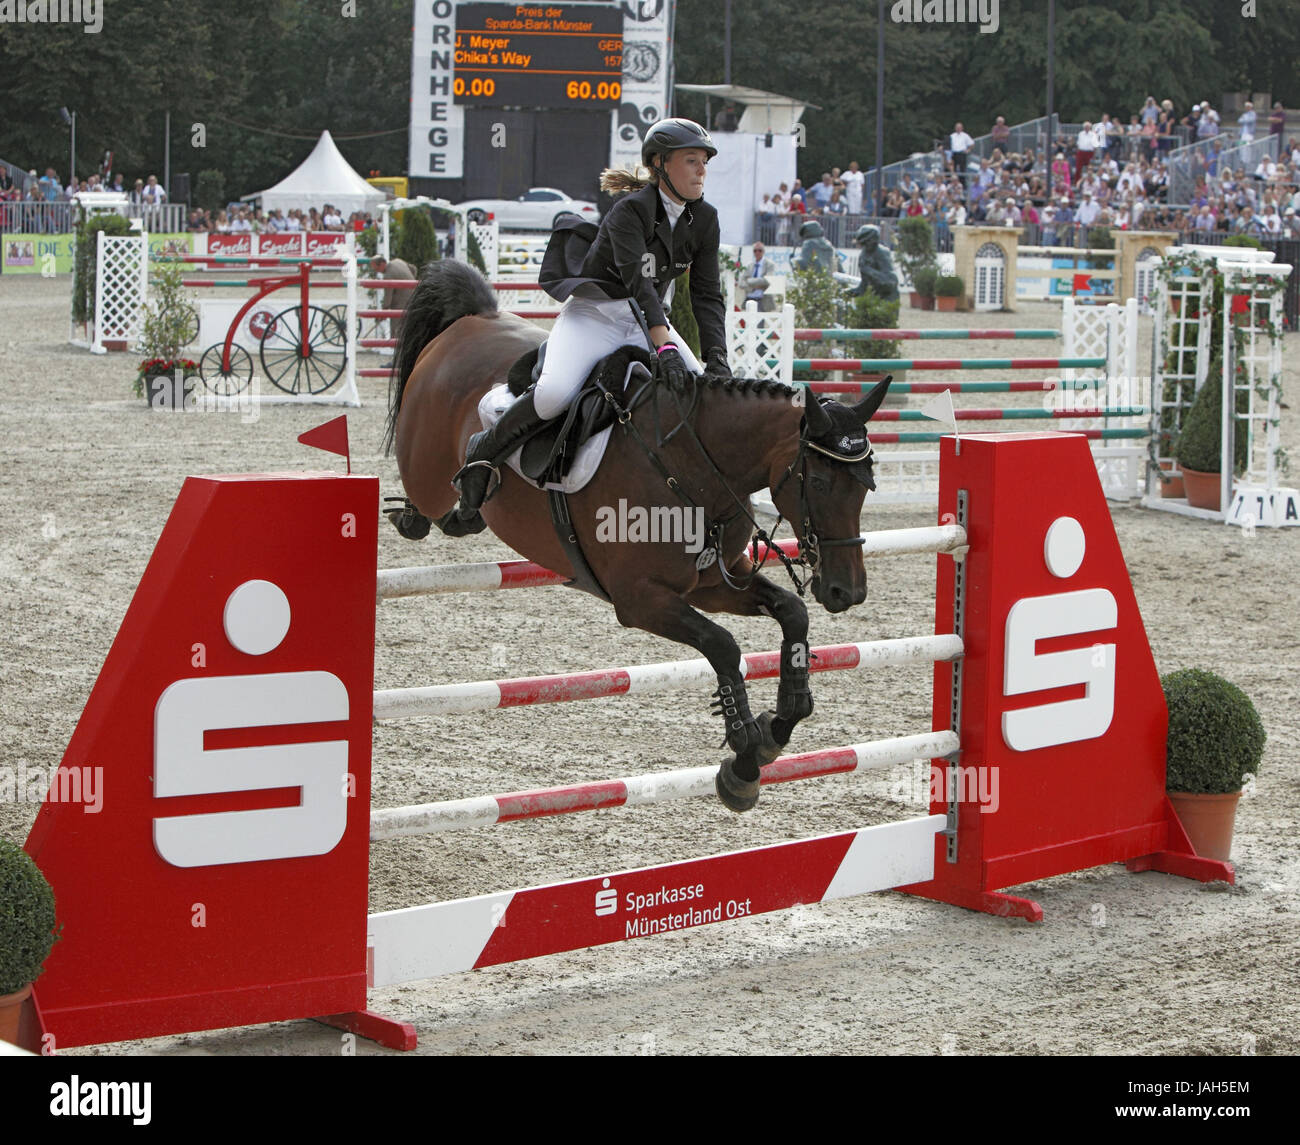 Horse-racing,German championships jumping and training in 2010 in Münster,Springreiterinnen,Janne-Friederike Meyer on Chikas Way,3rd square,bronze medal, Stock Photo